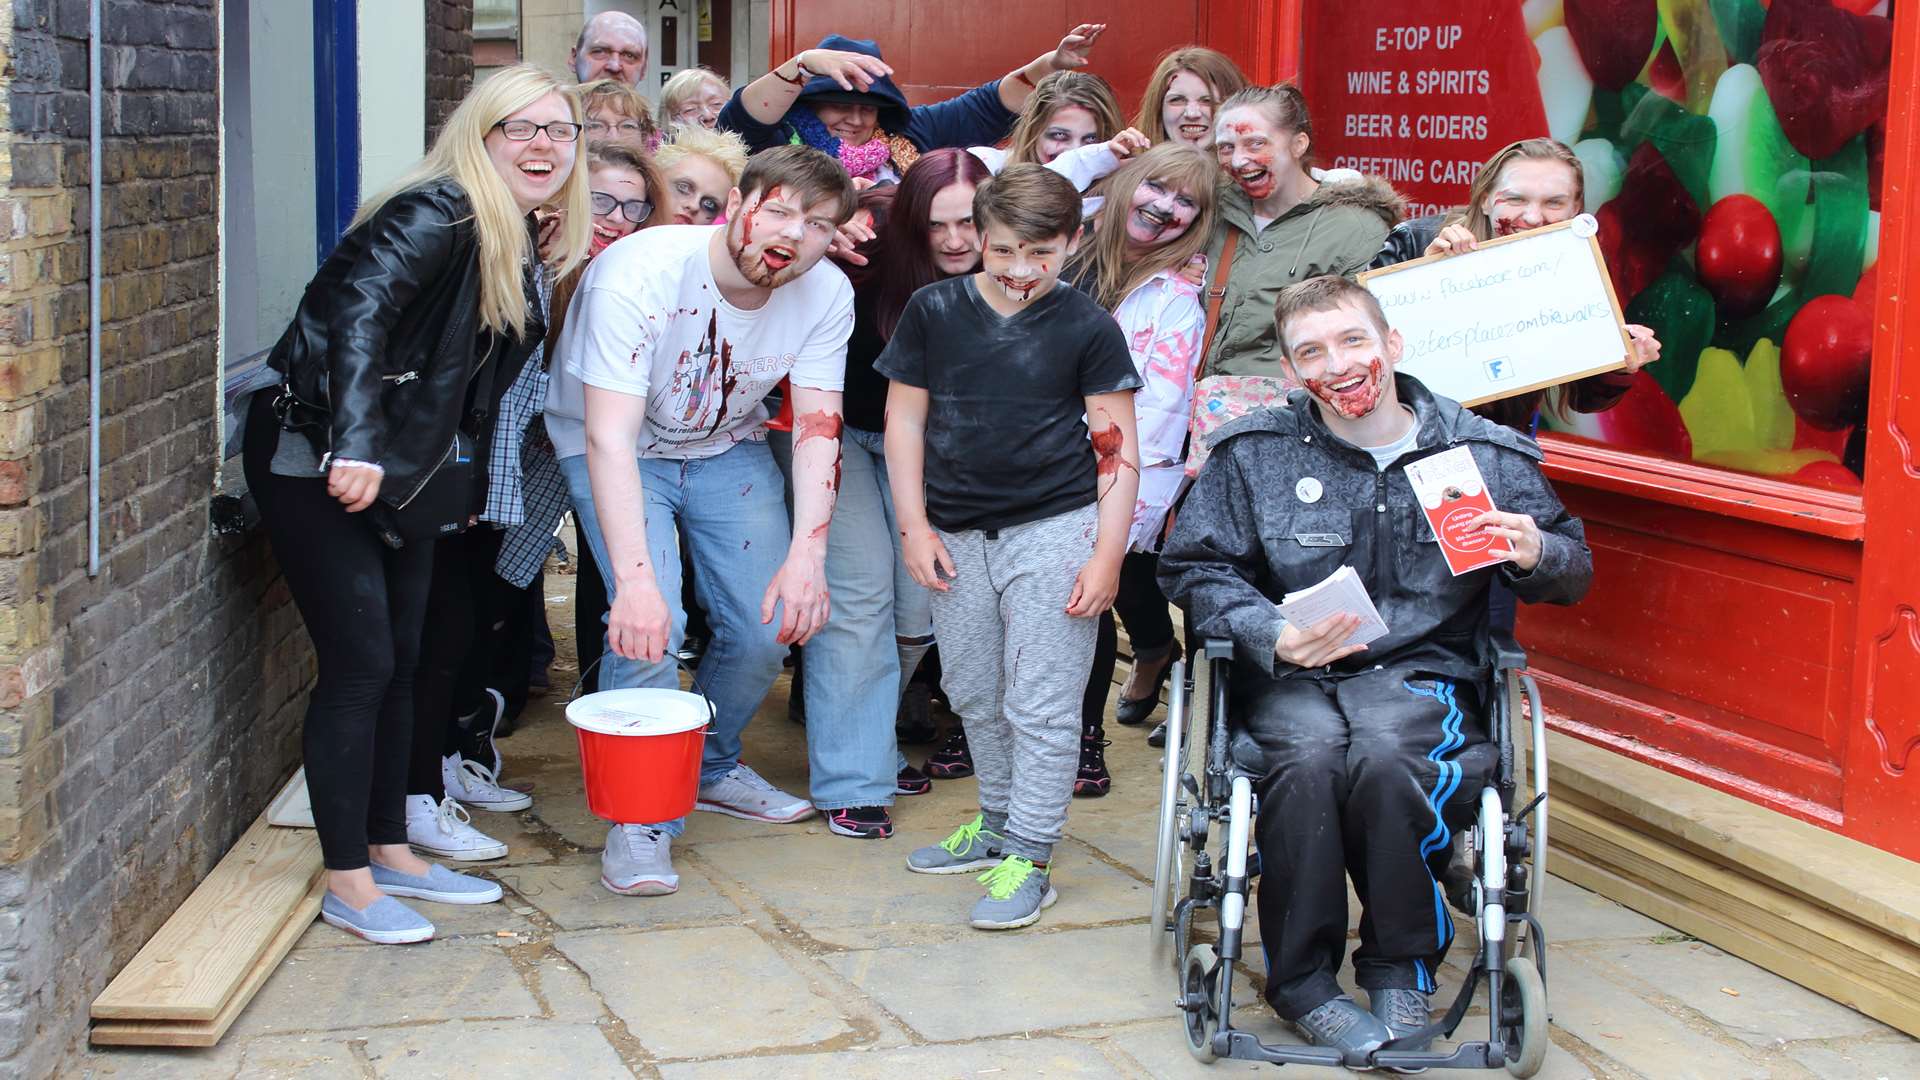 Peter's Place plans charity zombie walk through Rochester